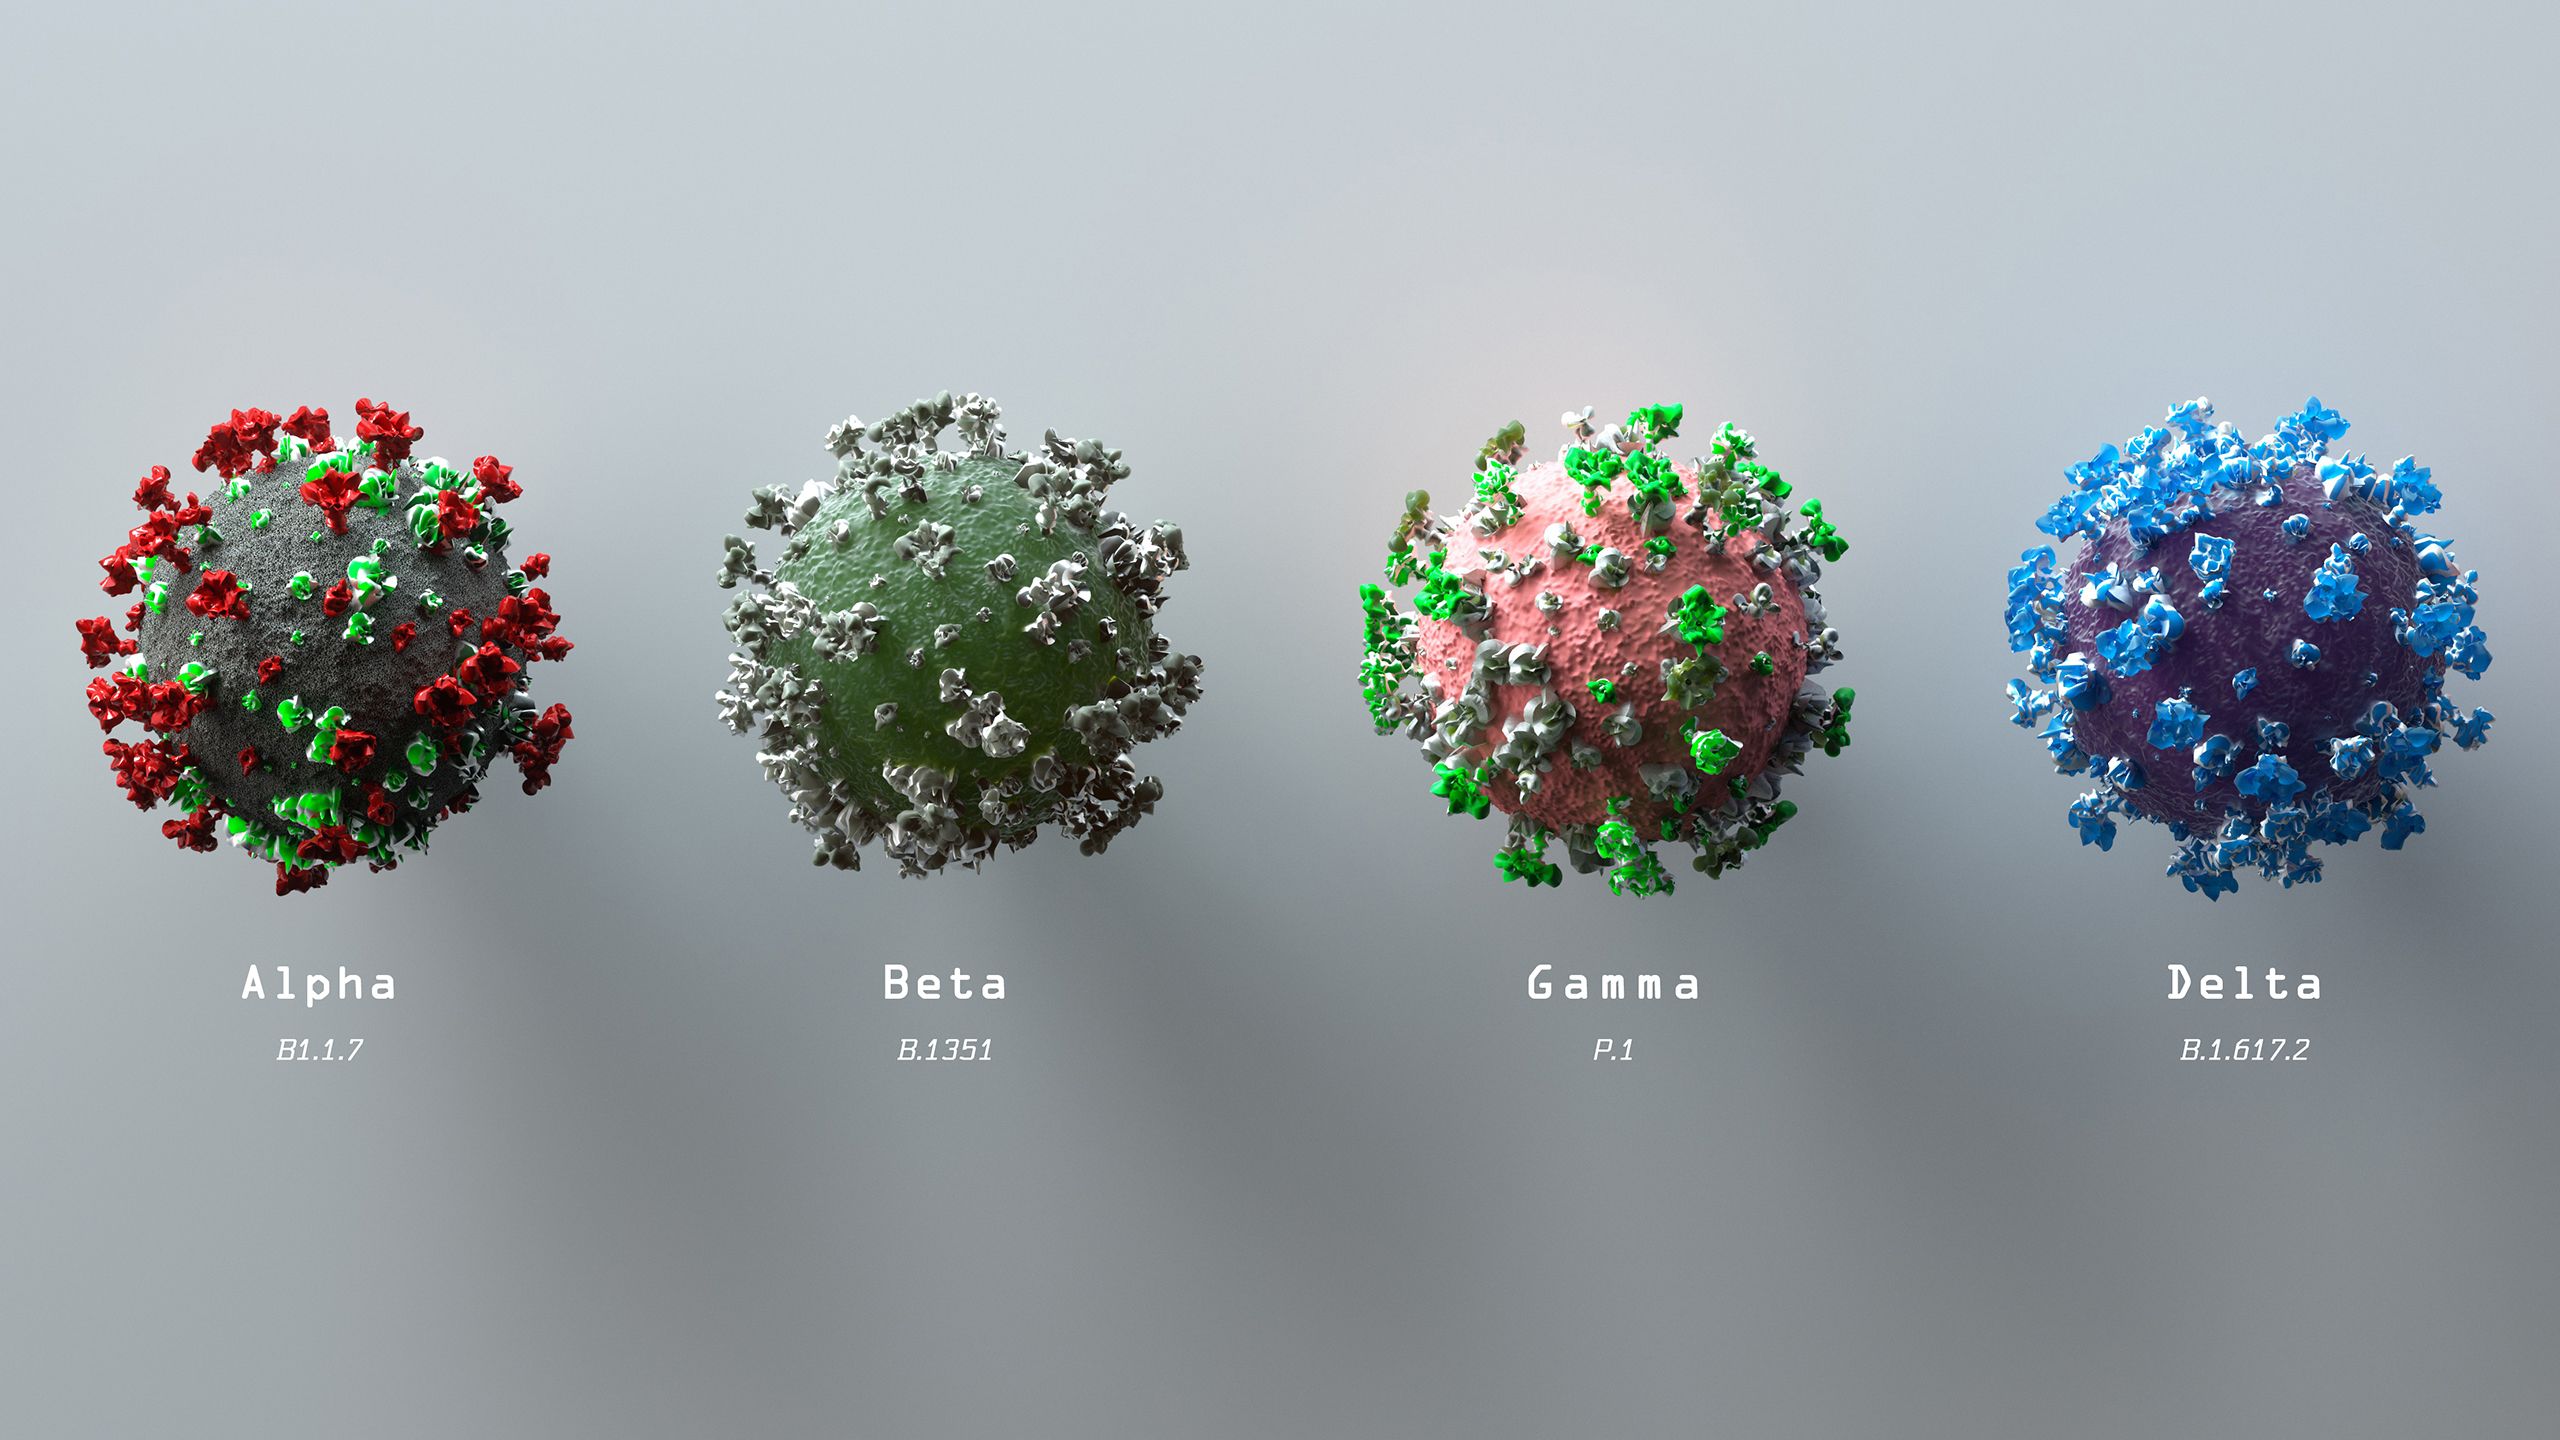 Digital generated image of different variants of SARS-CoV-2